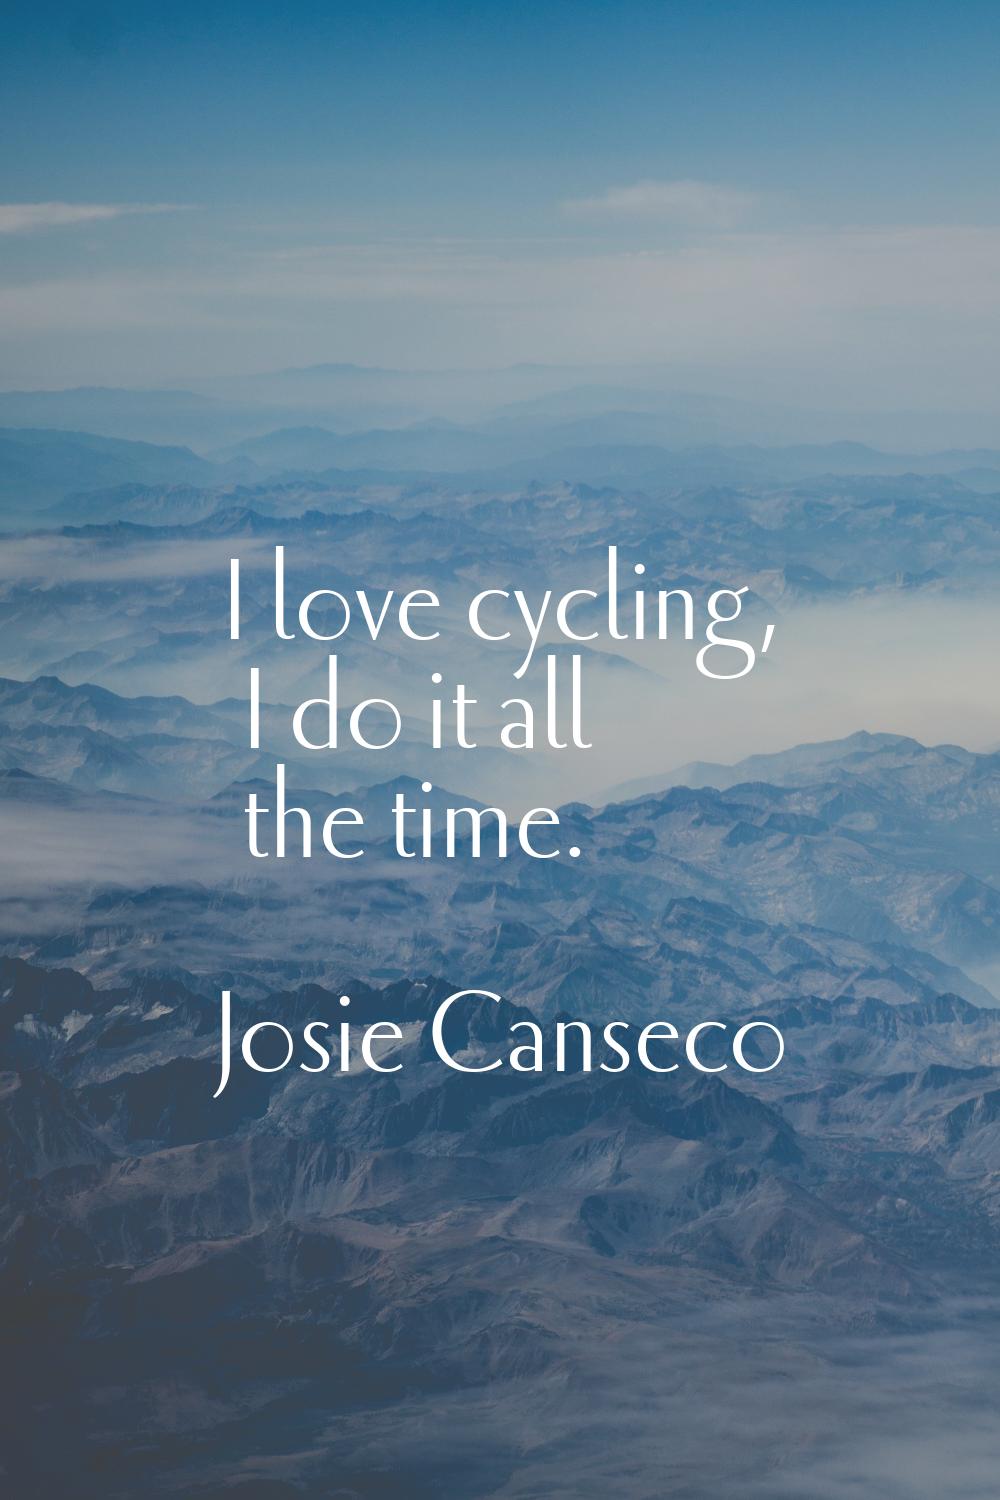 I love cycling, I do it all the time.